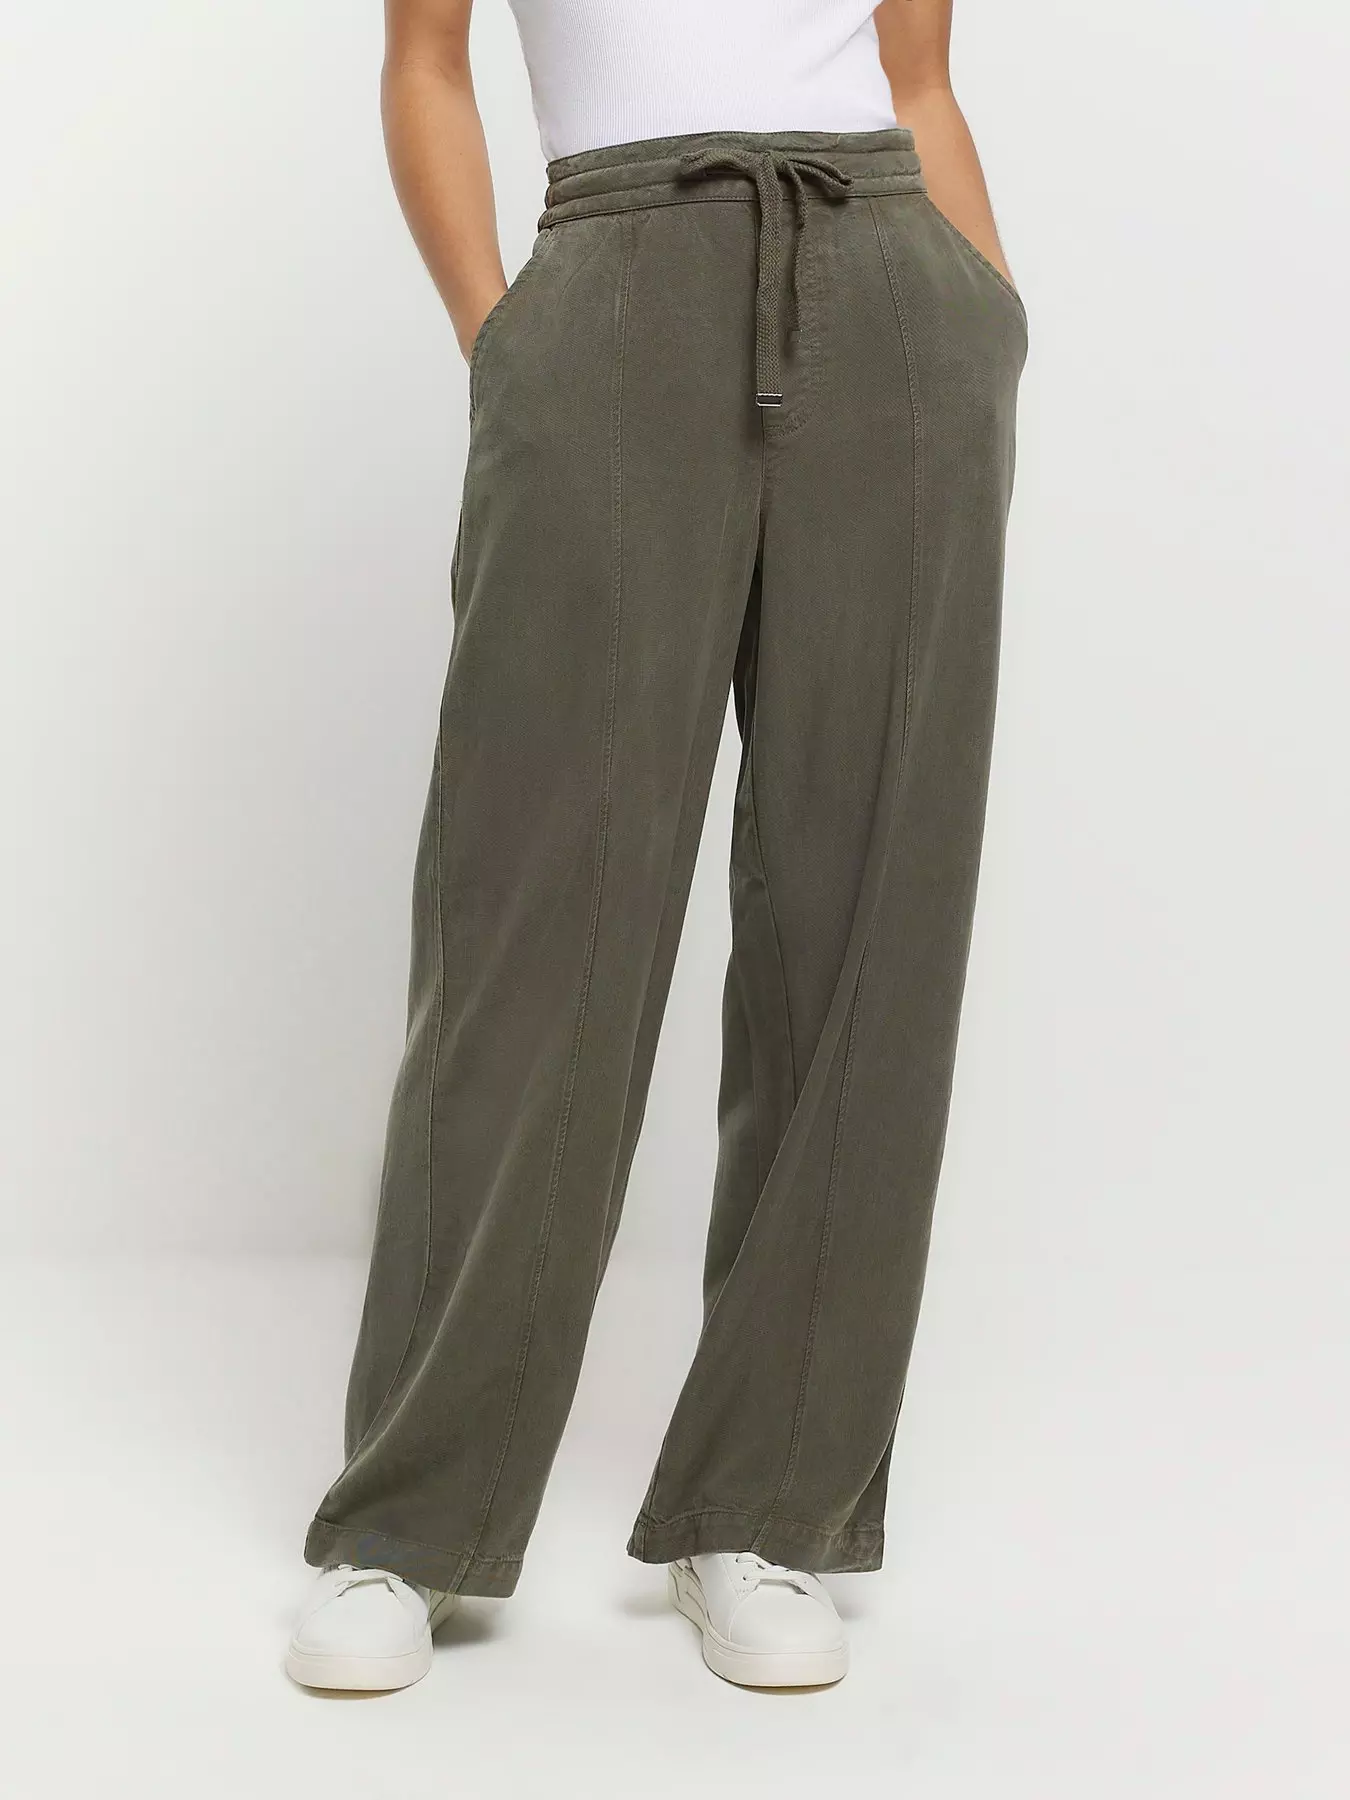 Pockets For Women - Yours Curve Khaki Green Crinkle Cargo Joggers